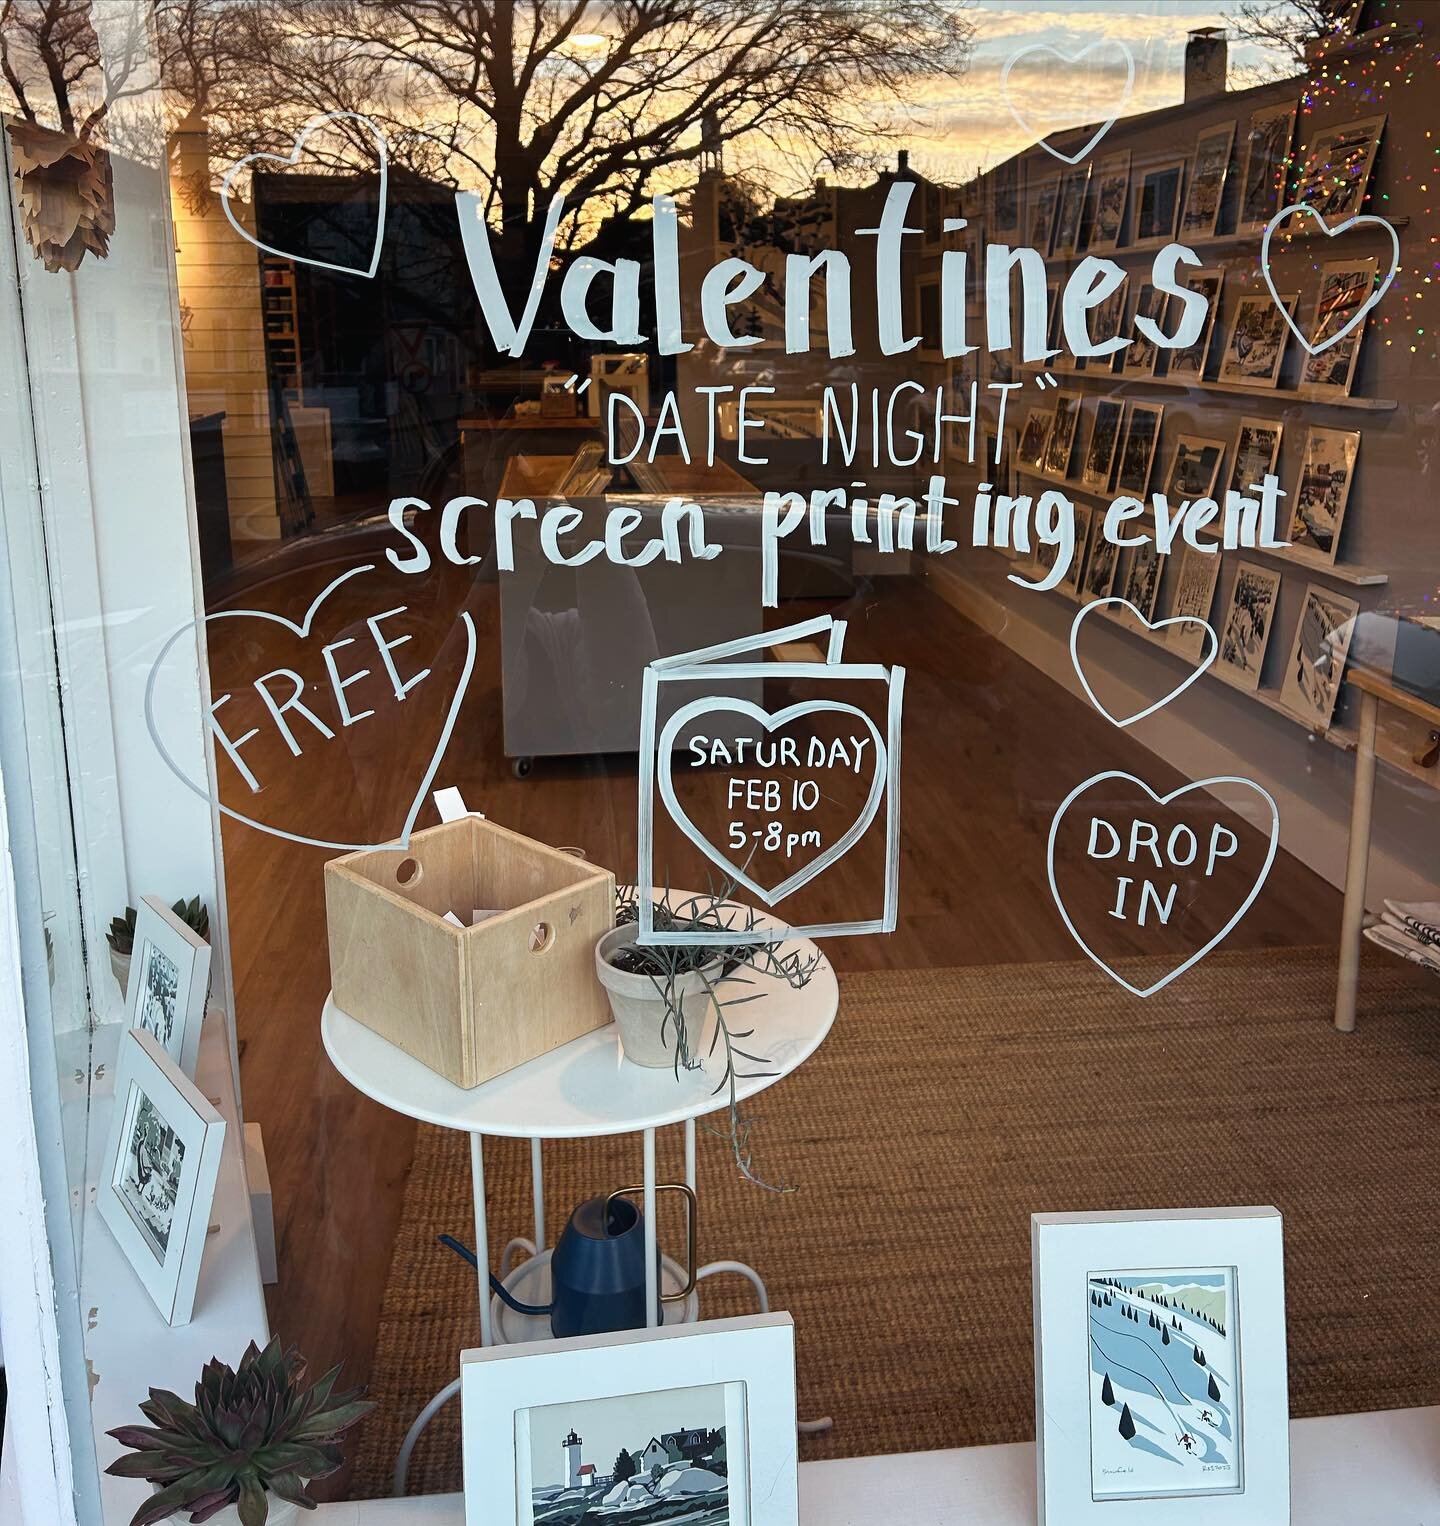 It&rsquo;s been 5 years since we last hosted our Valentine&rsquo;s &ldquo;date night&rdquo; screen printing event, and we are so excited to bring it back in our new Rockport studio! Drop in from 5pm-8pm on Sat 2/10, with your date or a friend, to pul